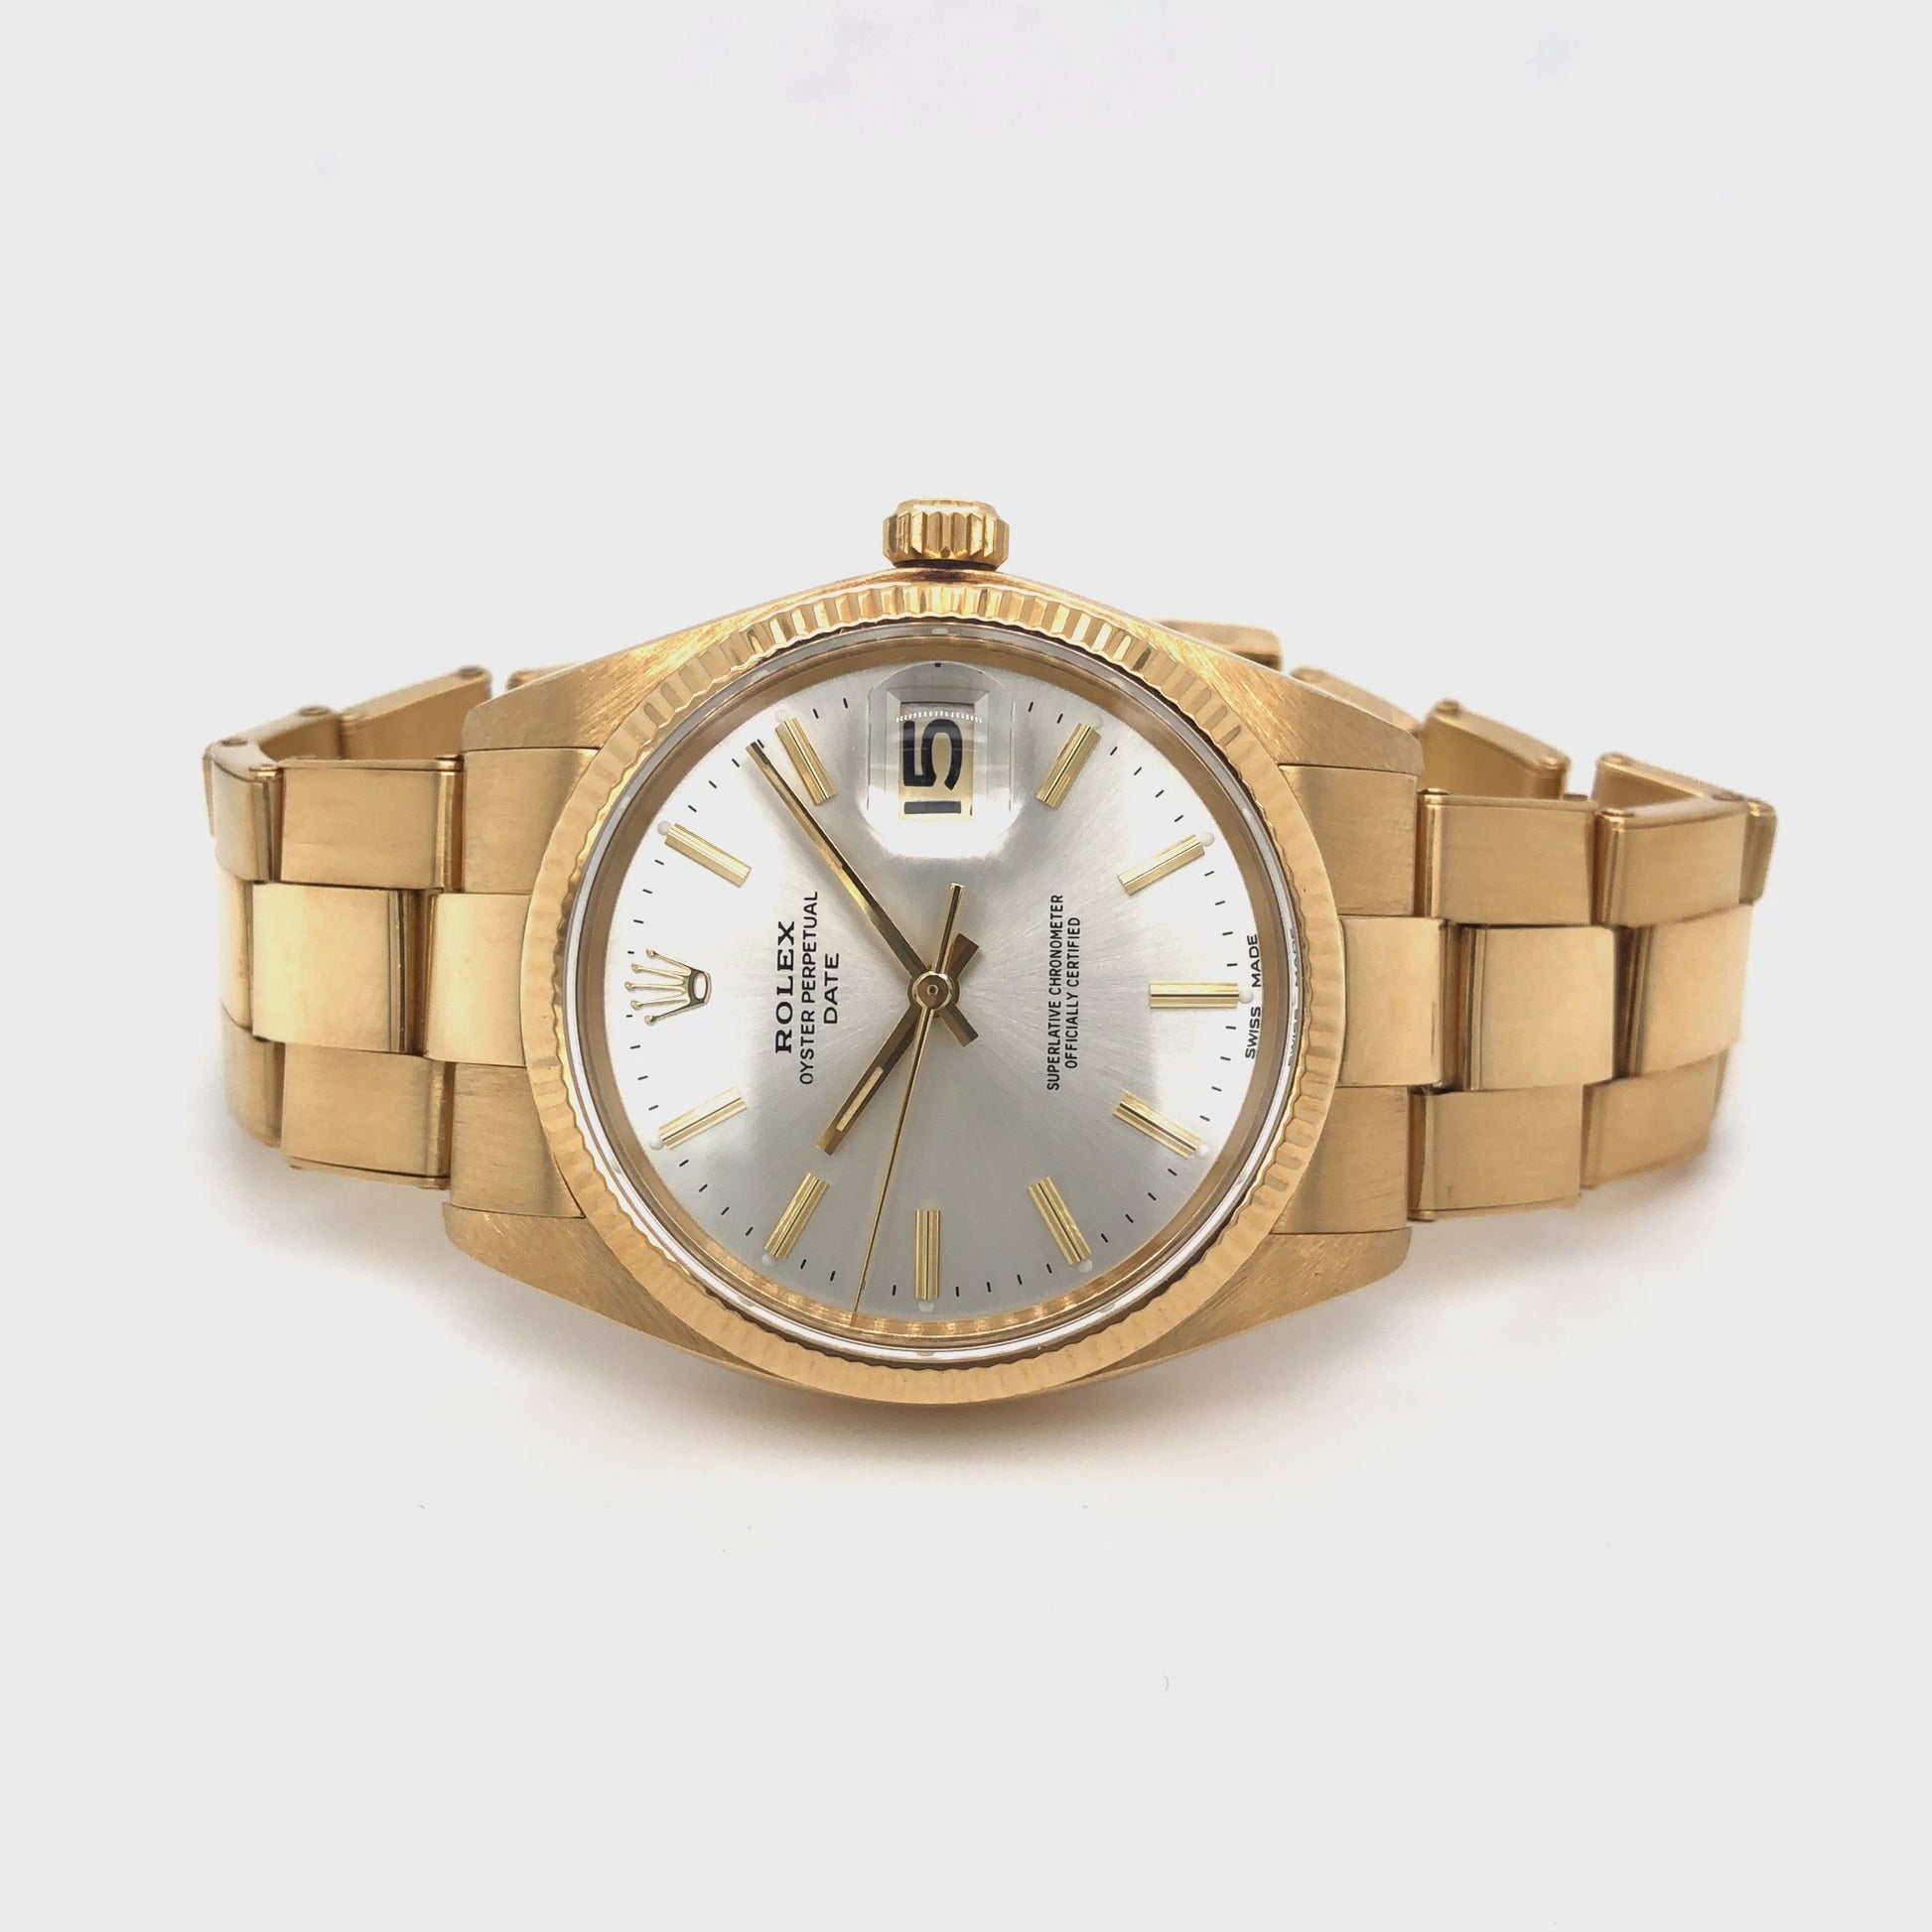 Rolex Oyster Perpetual Date Vintage Armbanduhr in 750 Gelbgold